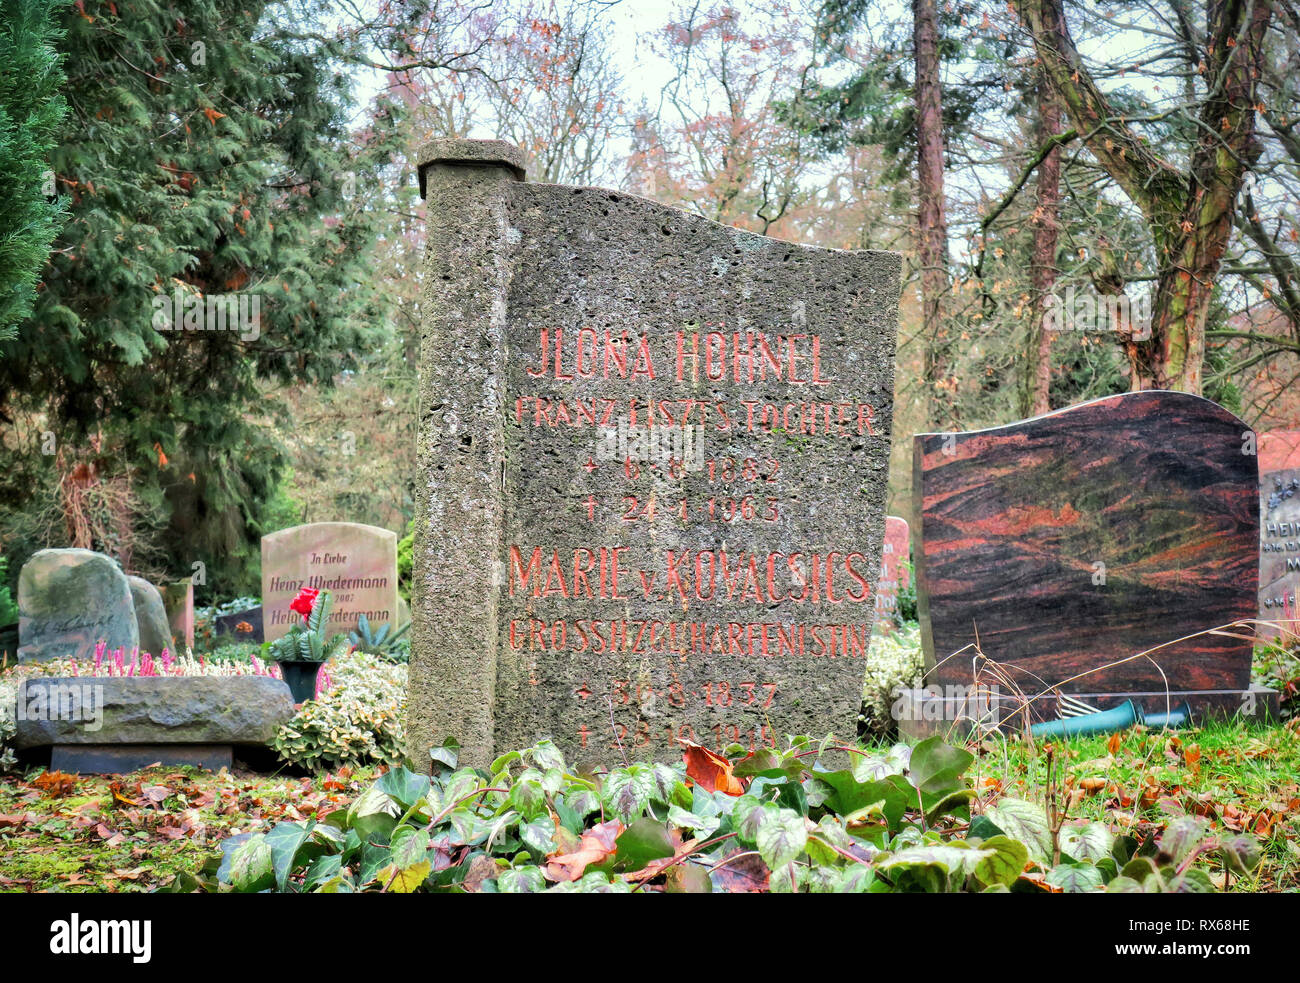 Weimar, Germany. 25th Dec, 2018. A gravestone with the inscription 'Ilona Höhnel Franz Liszt's daughter' and 'Marie v. Kovacsics' stands on the Weimar main cemetery. Ilona Höhnel is said to have been the composer's illegitimate daughter. Credit: Soeren Stache/dpa-Zentralbild/ZB/dpa/Alamy Live News Stock Photo